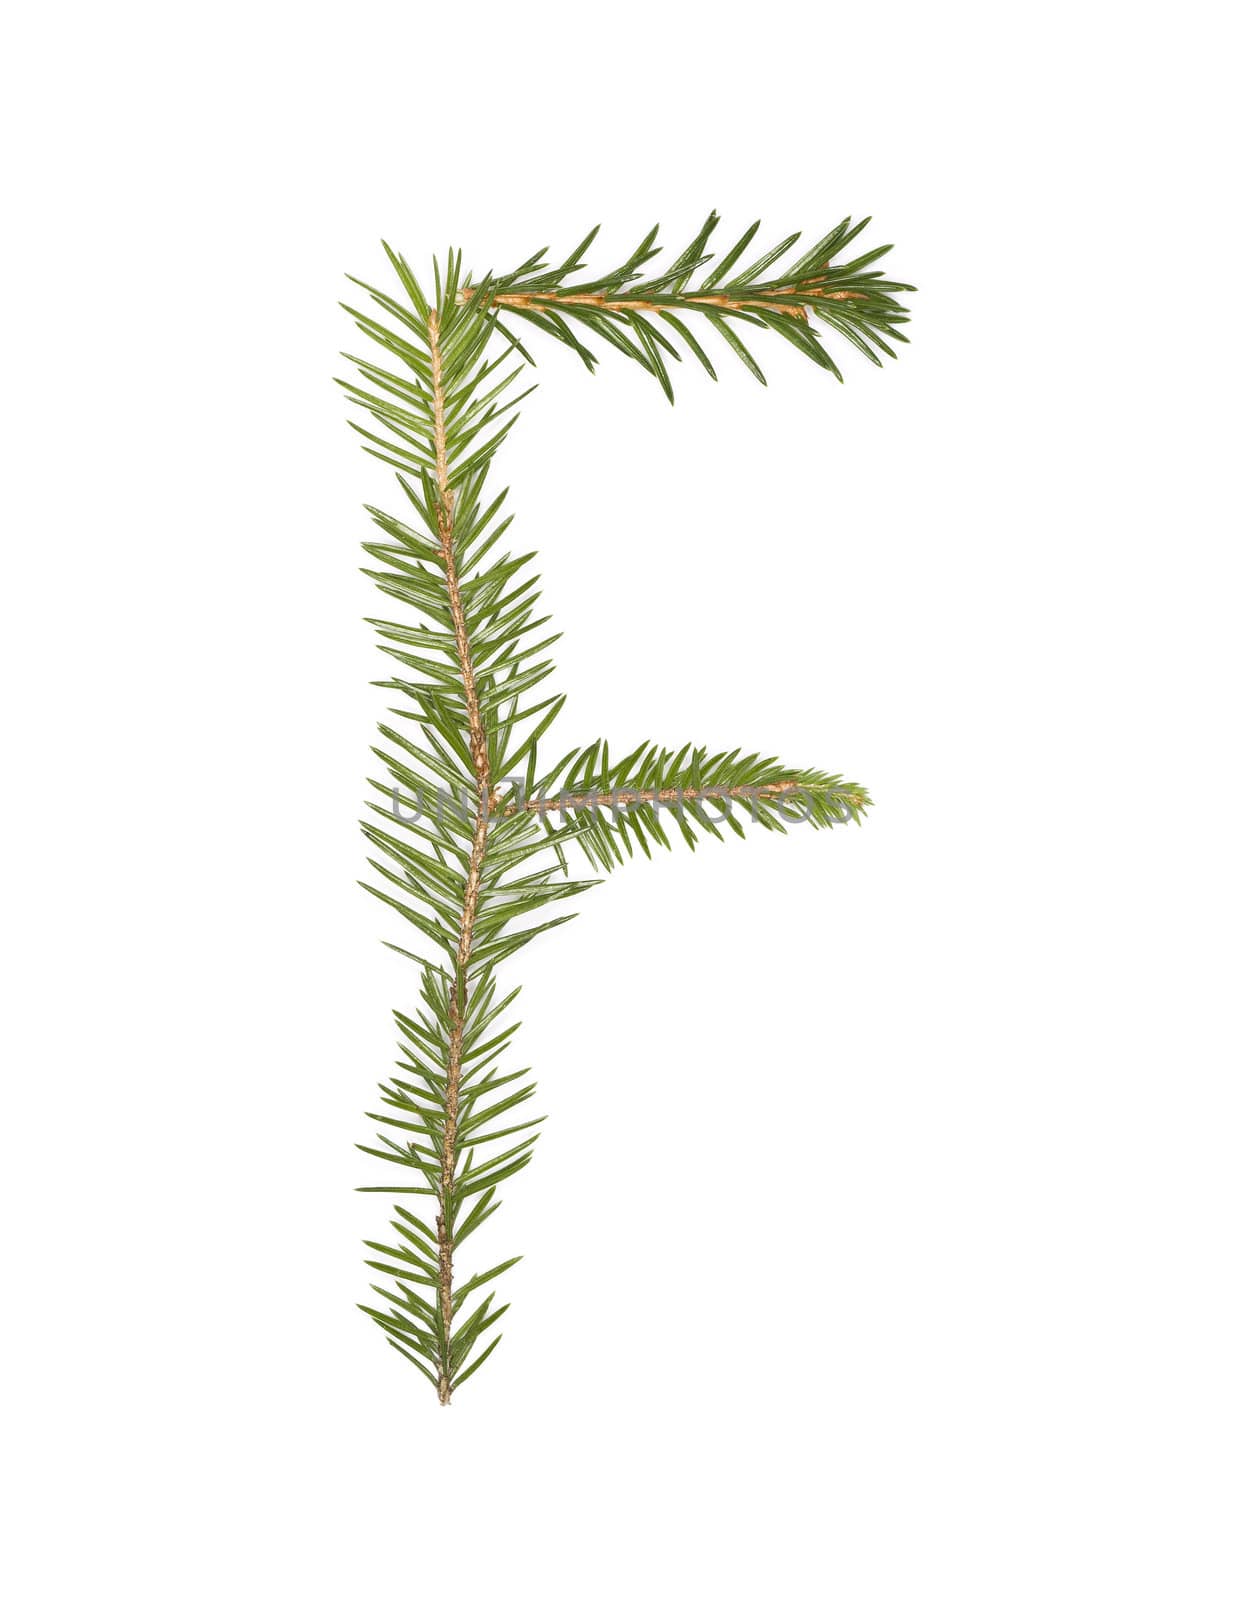 Spruce twigs forming the letter 'F' by gemenacom